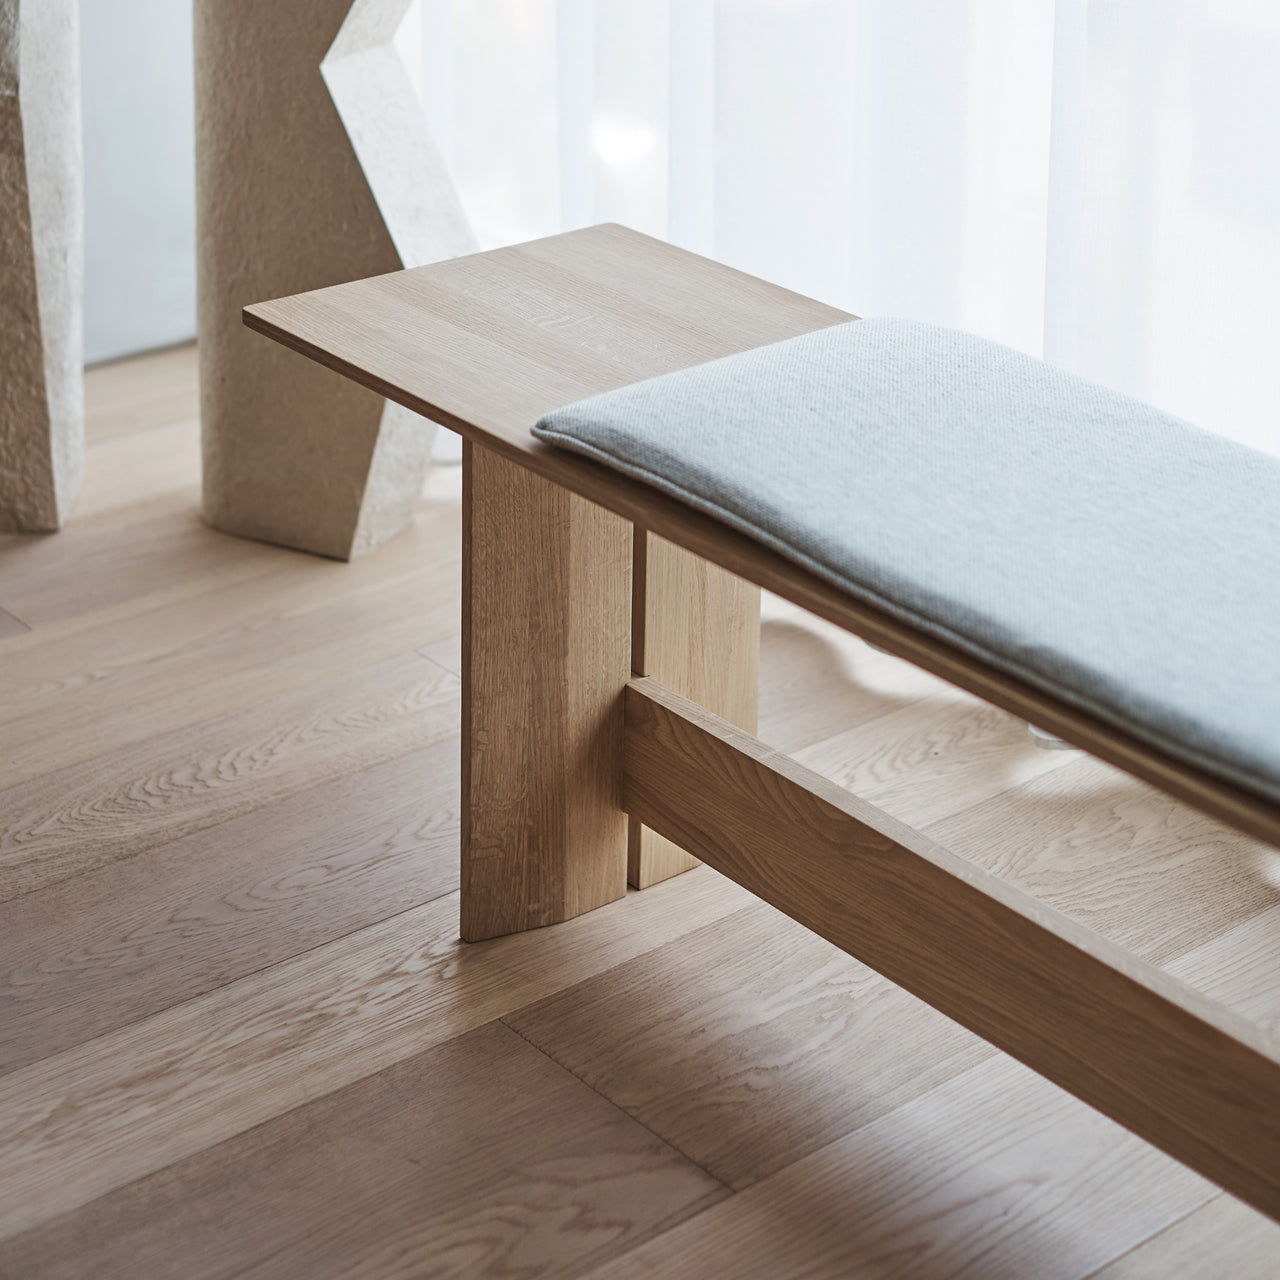 Bench A-B01: Upholstered